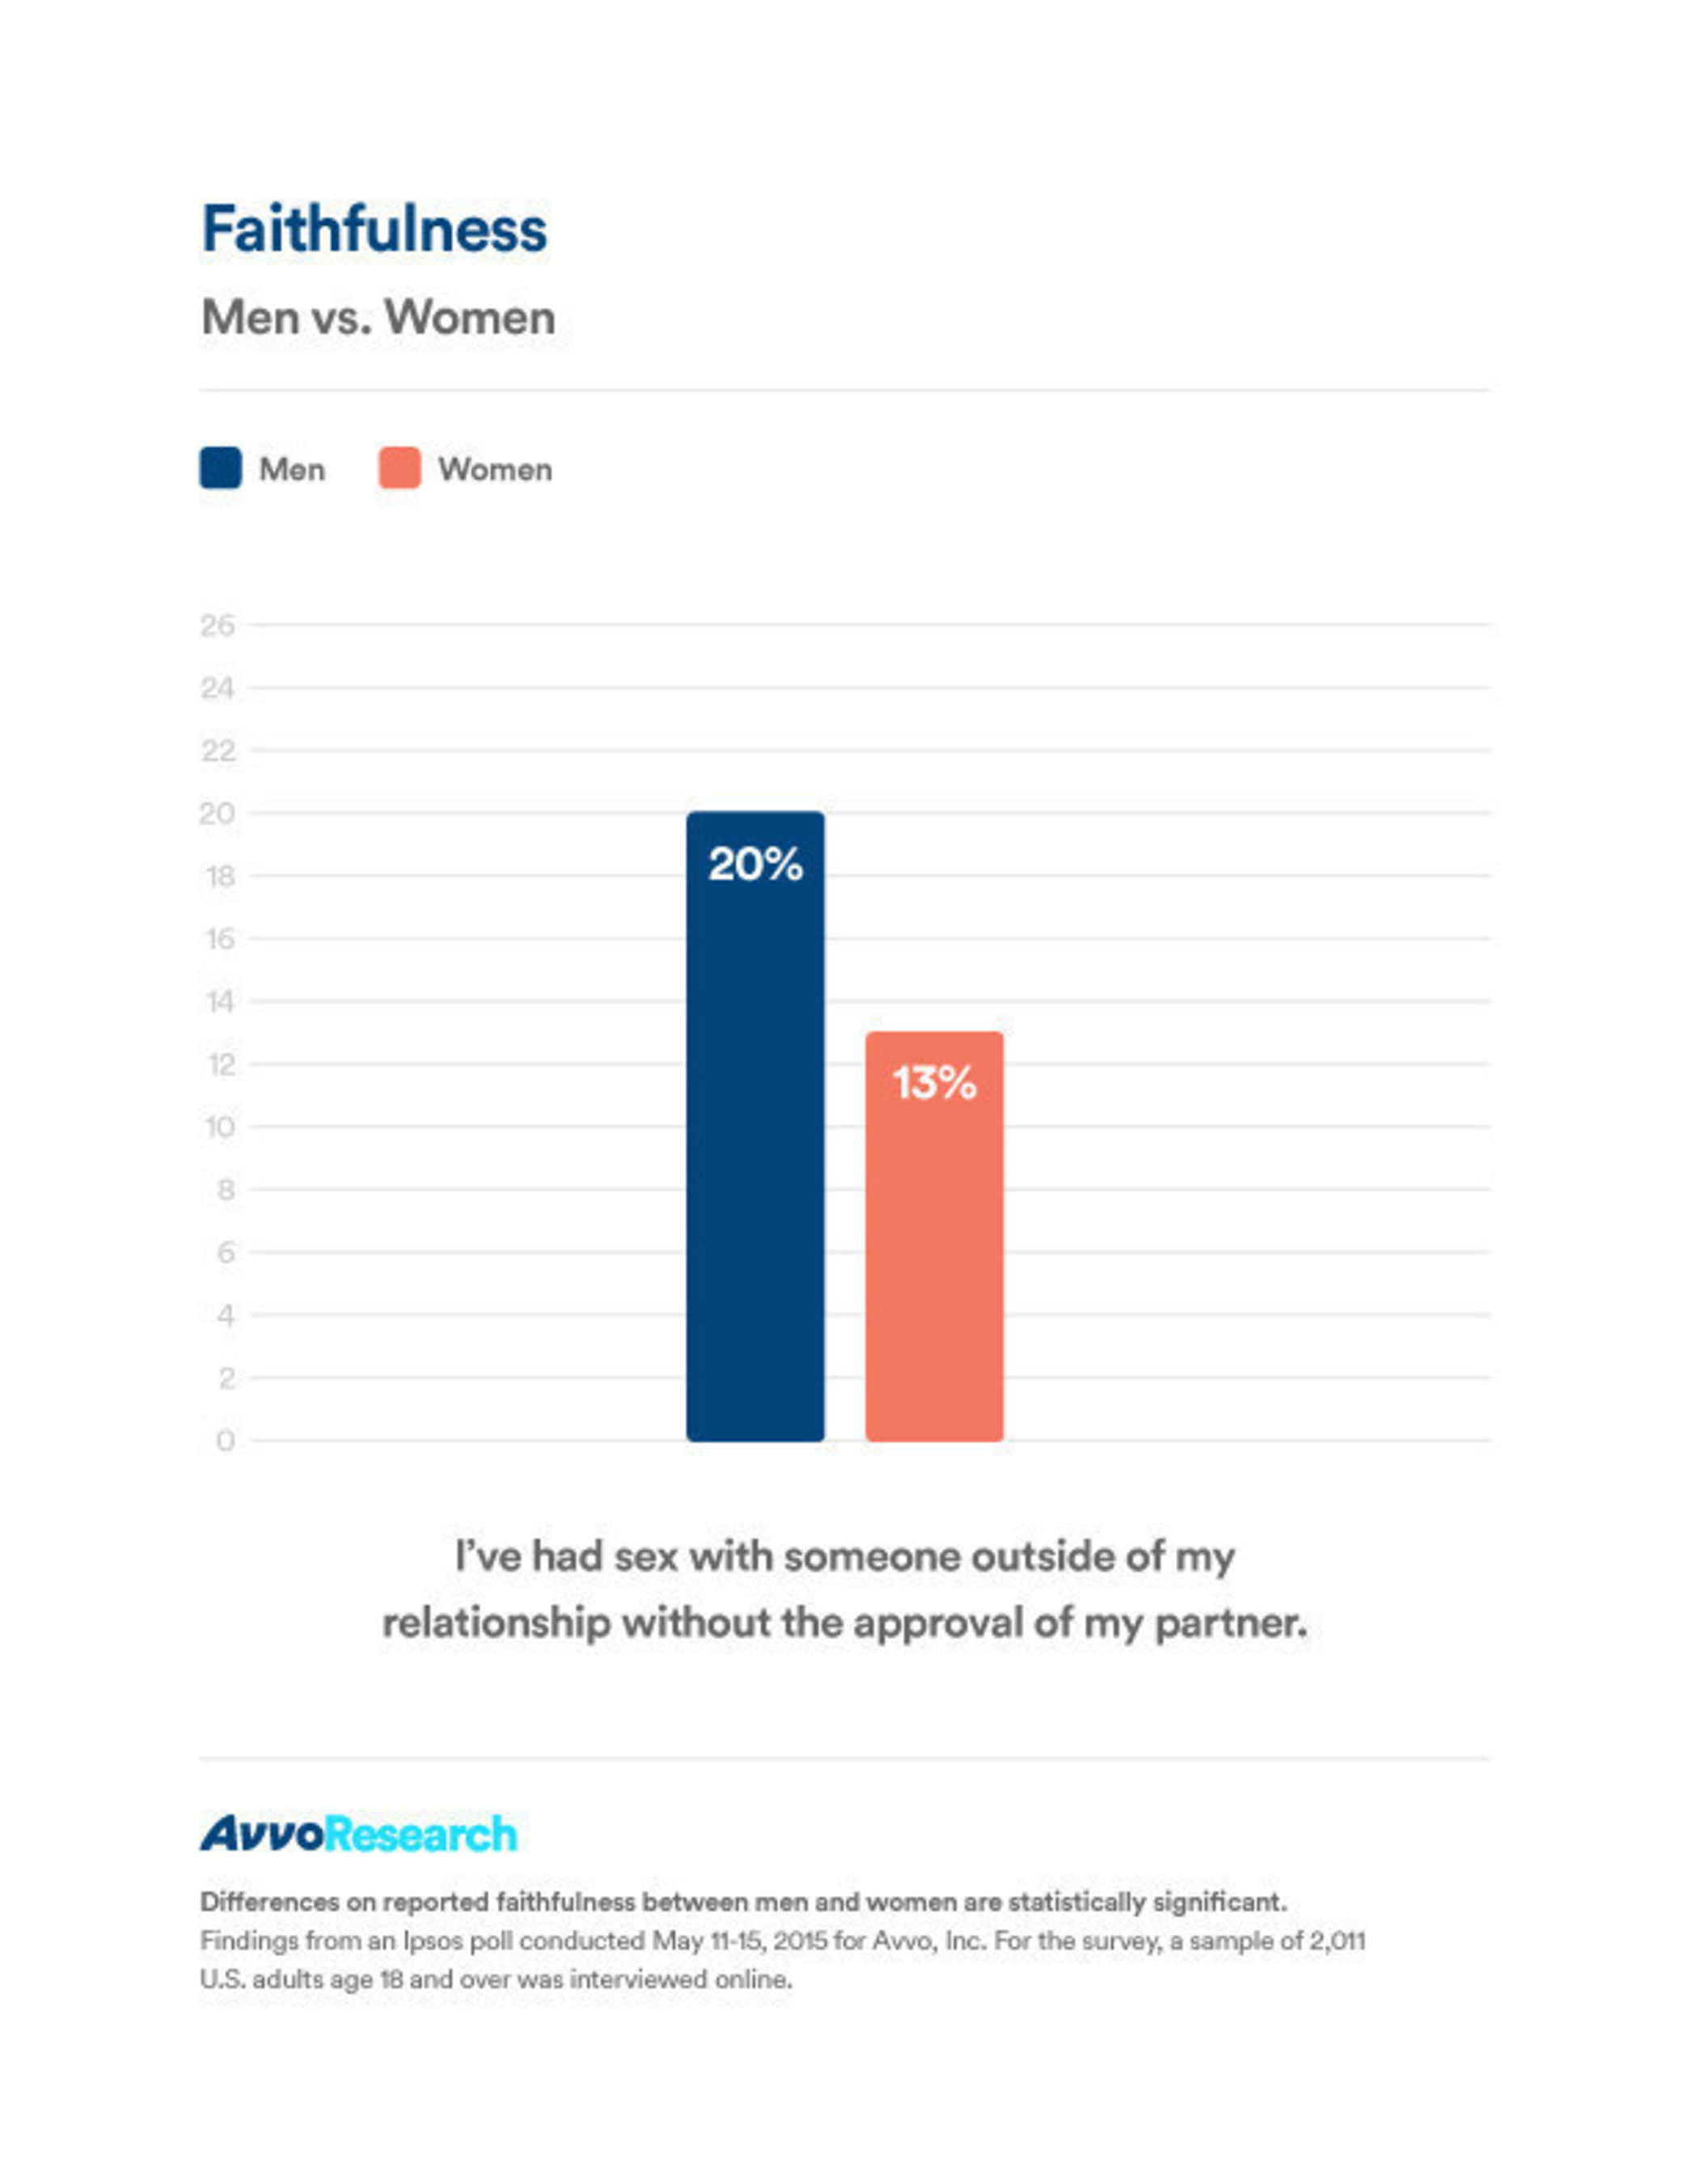 Faithfulness: Men Vs. Women. "I've had sex with someone outside of my relationship without the approval of my partner." Avvo Research 2015